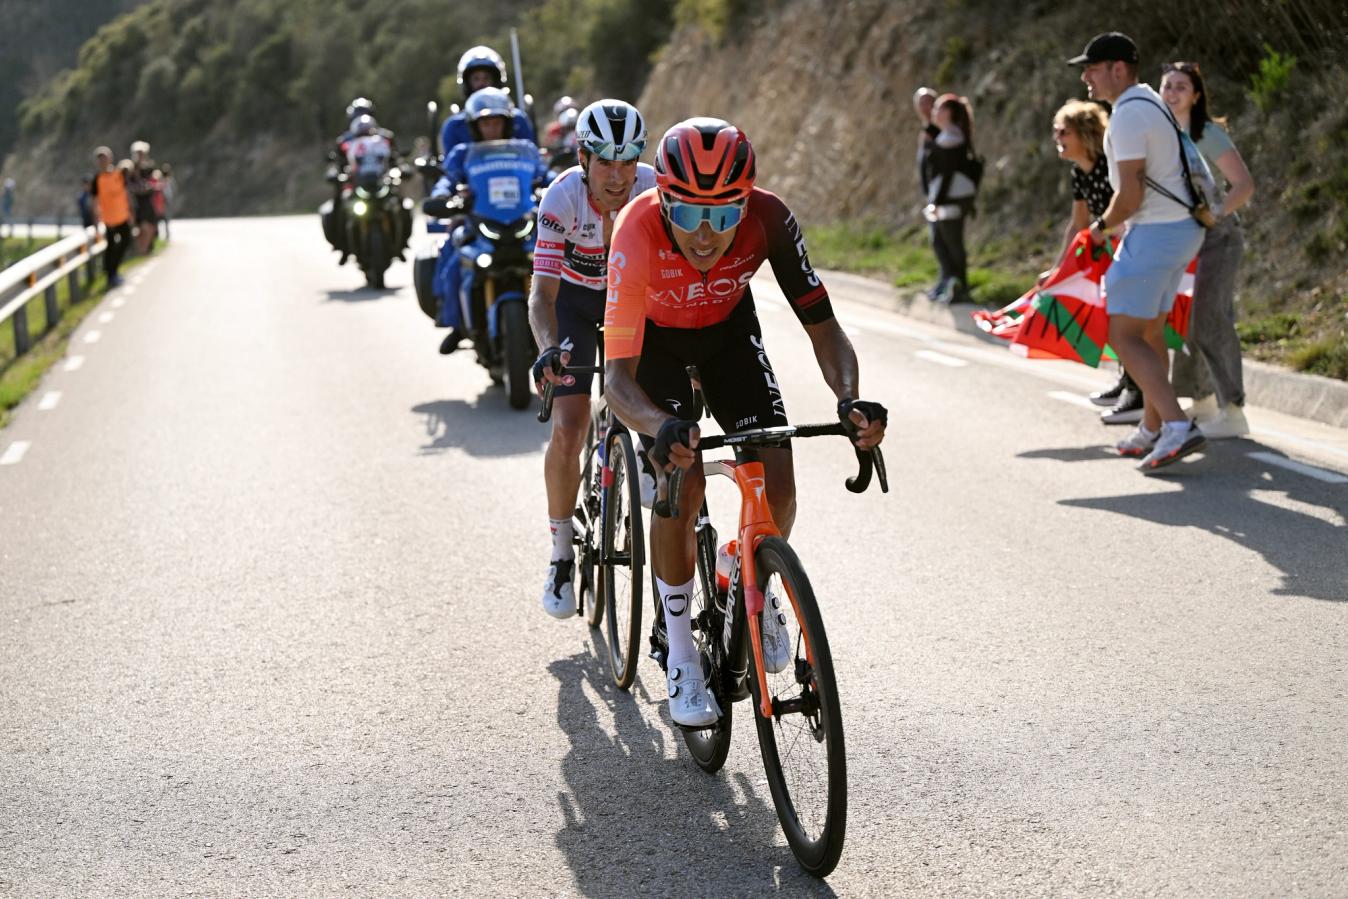 Bernal and Mikel Landa came to the line together on stage 6, the best of the rest behind Tadej Pogačar